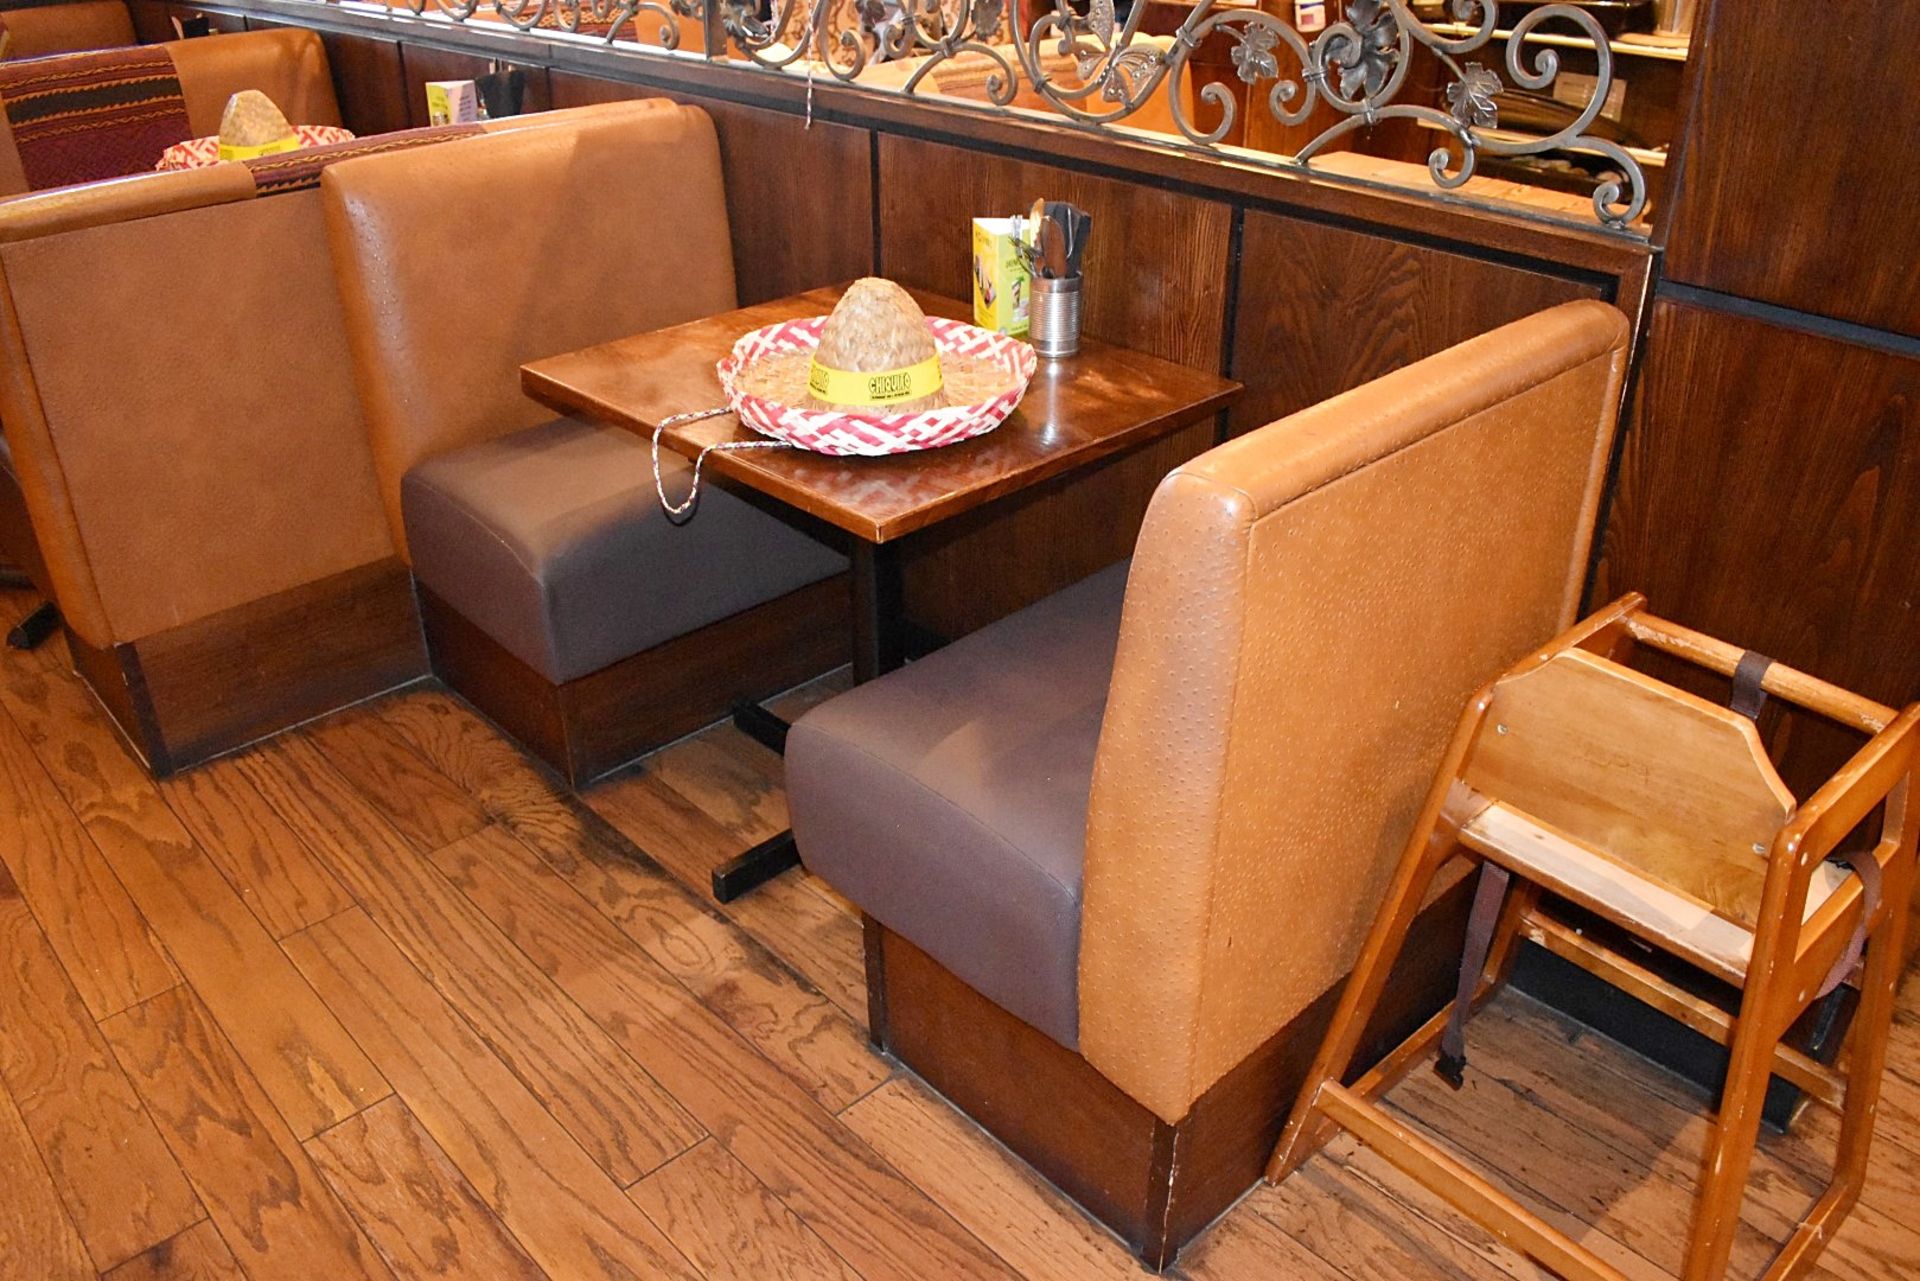 24 x Sections of Seating Booth With Fabric Backs and Faux Leather Seats - Image 20 of 34